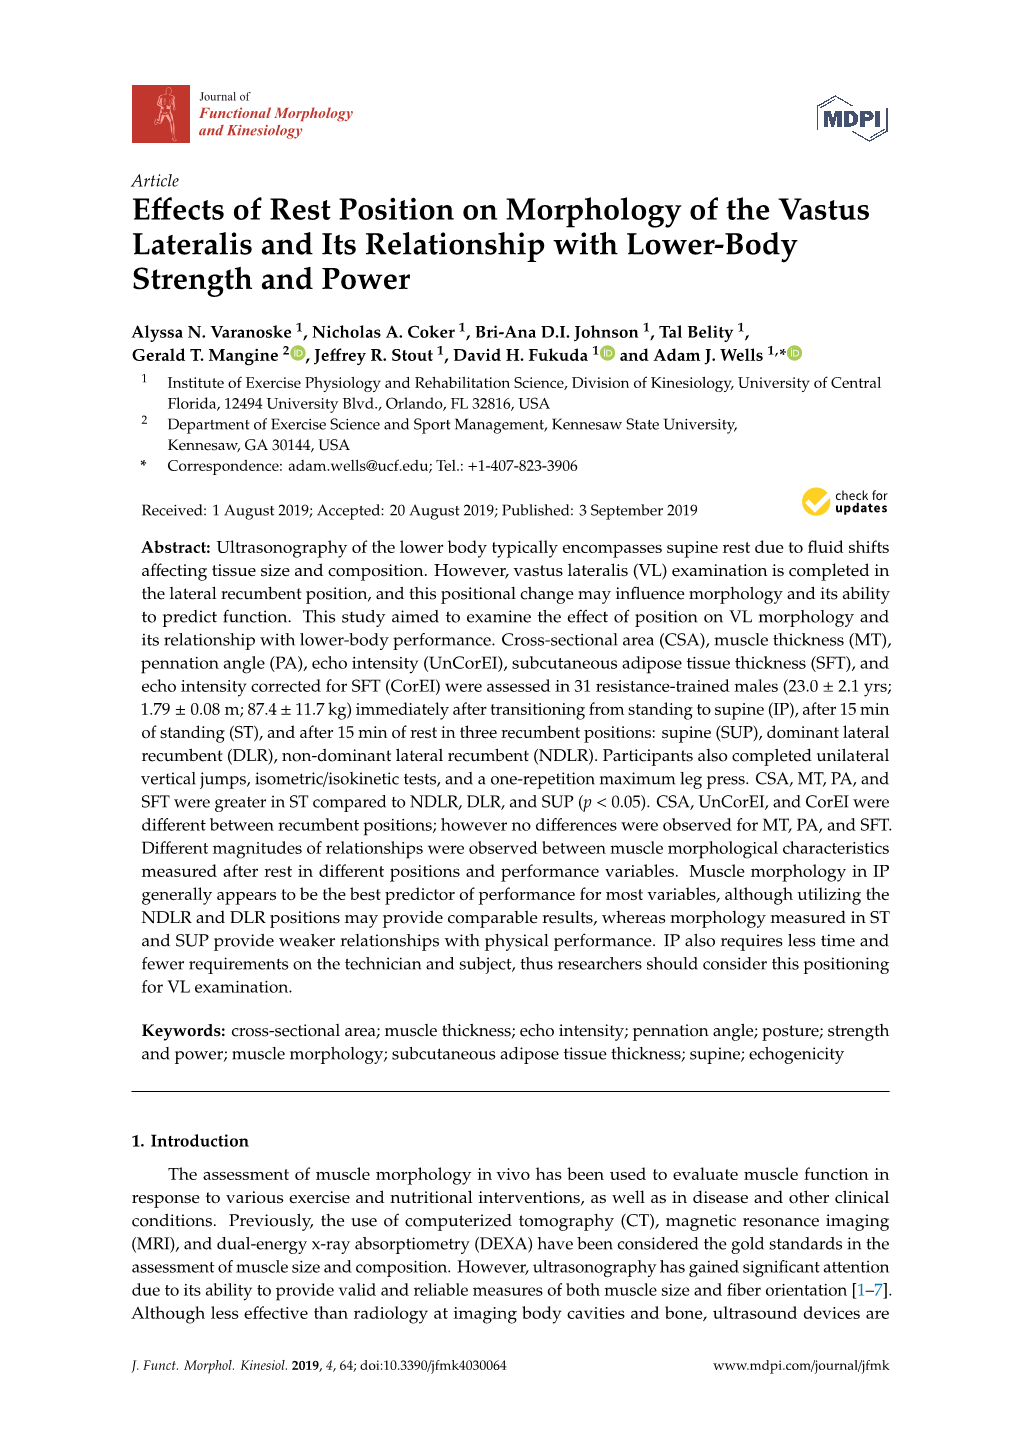 Effects of Rest Position on Morphology of the Vastus Lateralis and Its Relationship with Lower-Body Strength and Power